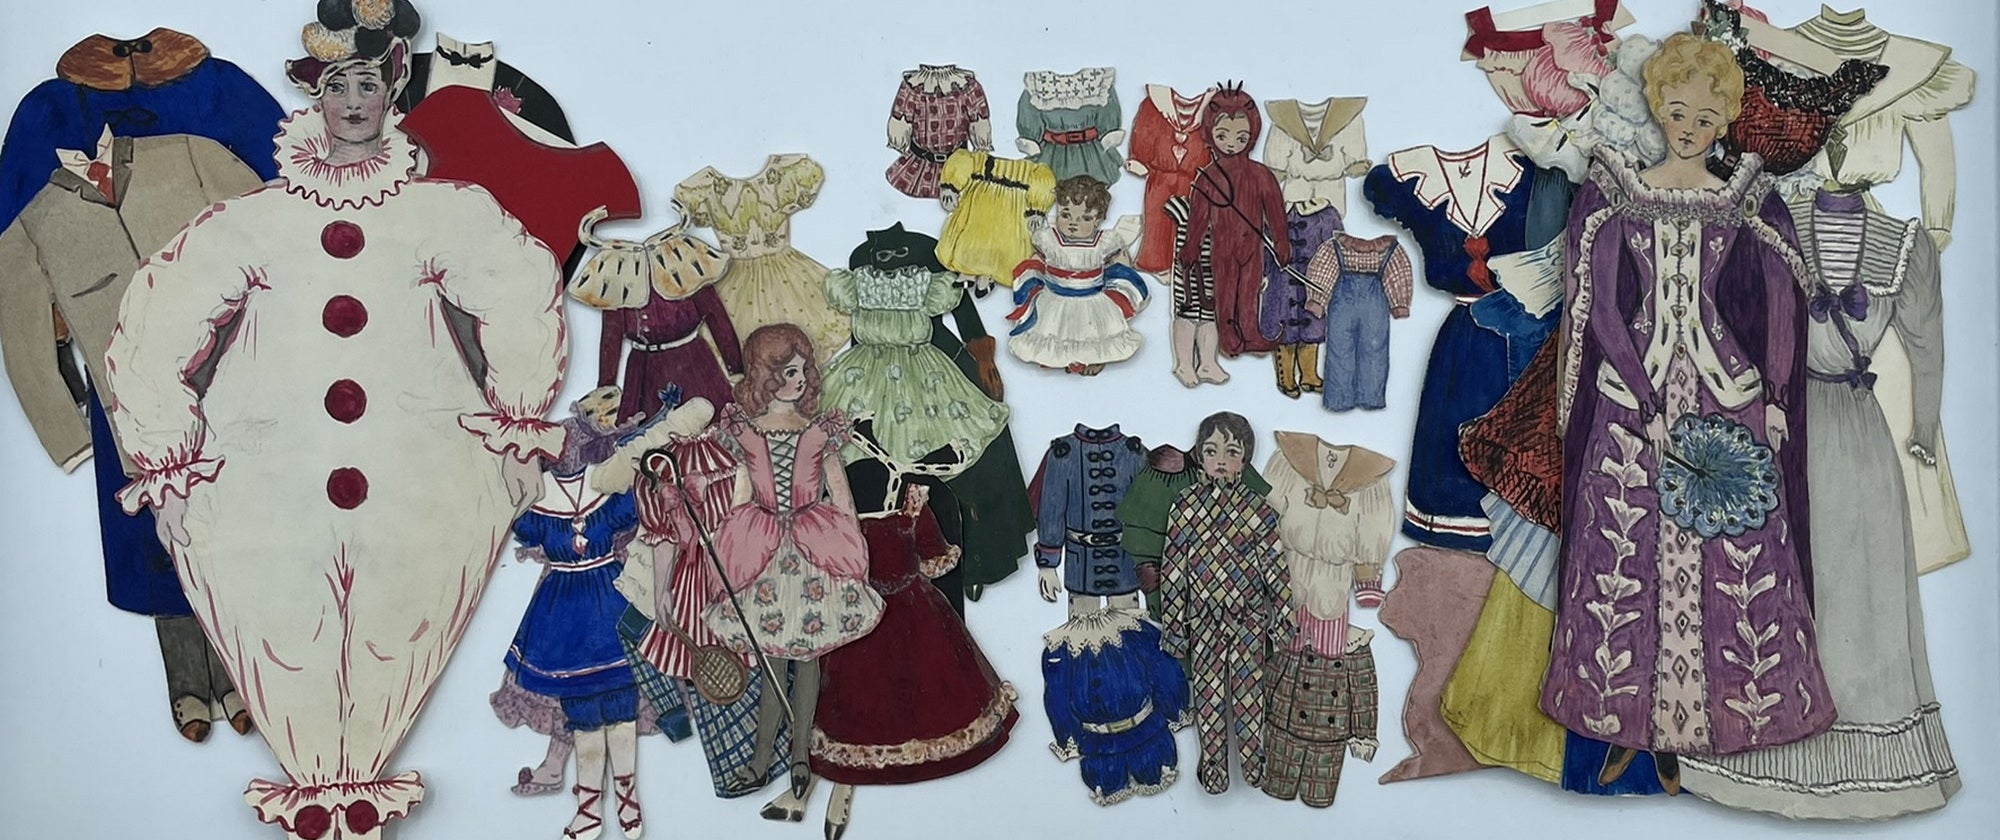 The "G." Family of 6 Handmade Watercolor Paper Dolls with